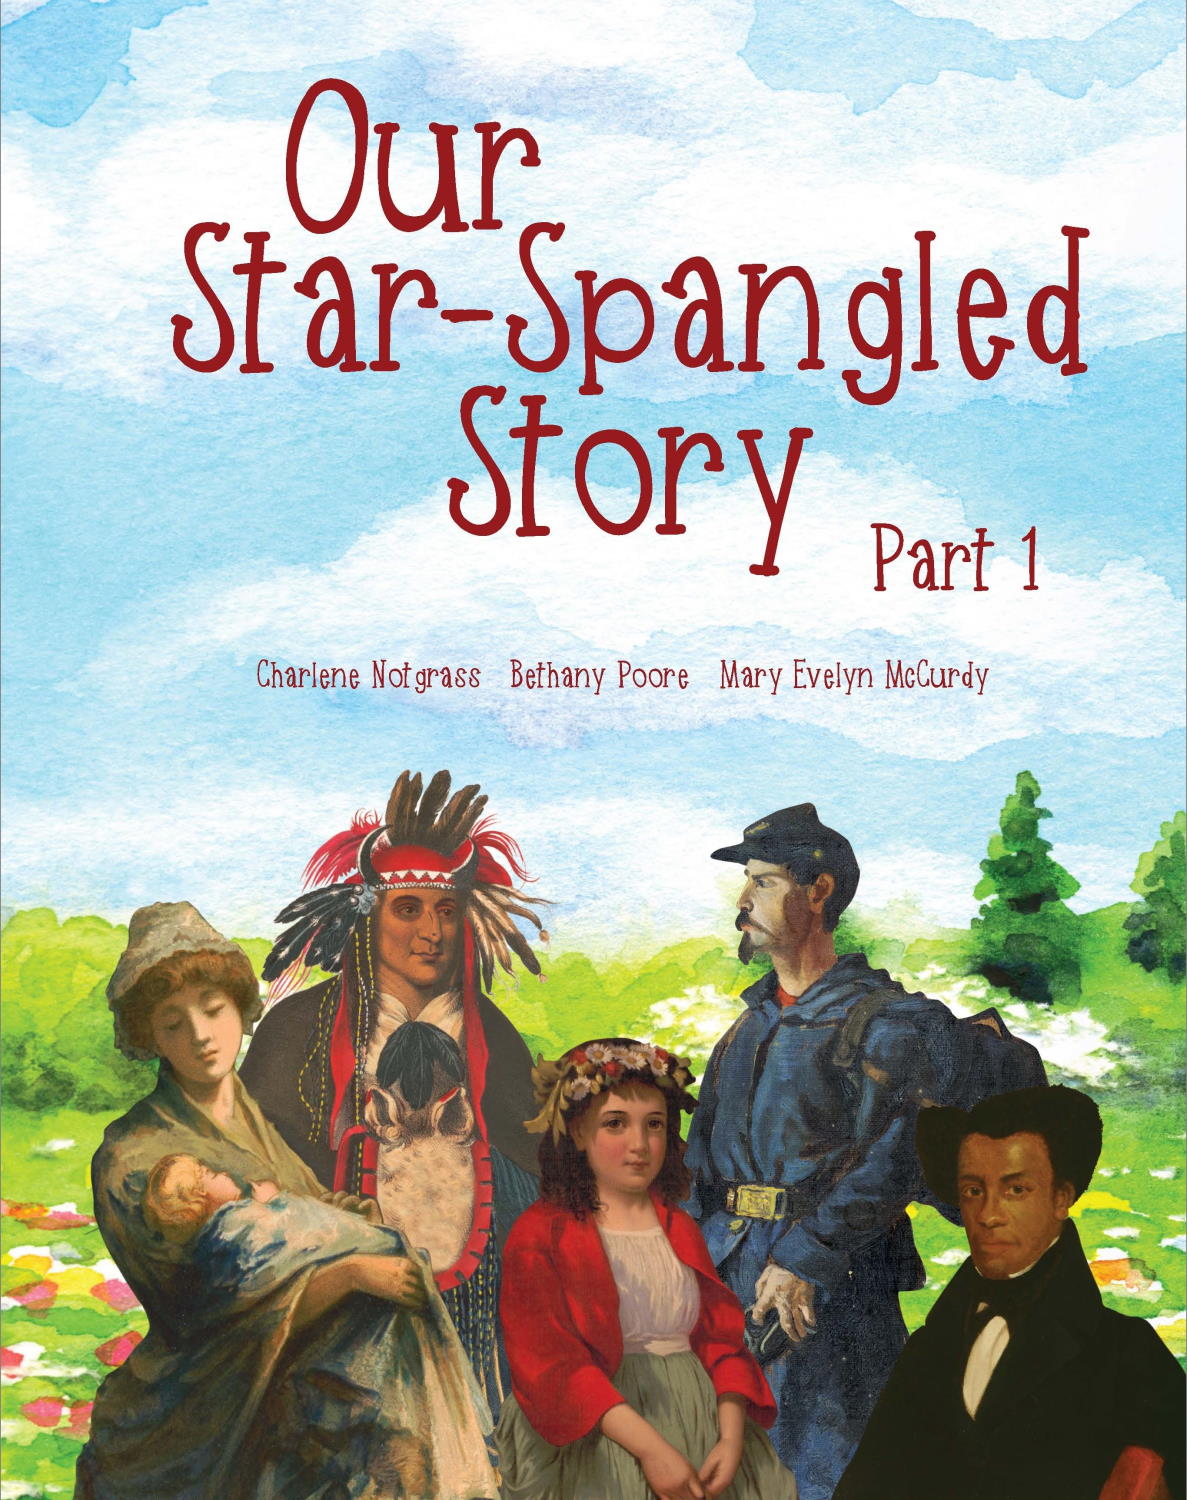 Our Star-Spangled Story Part 1